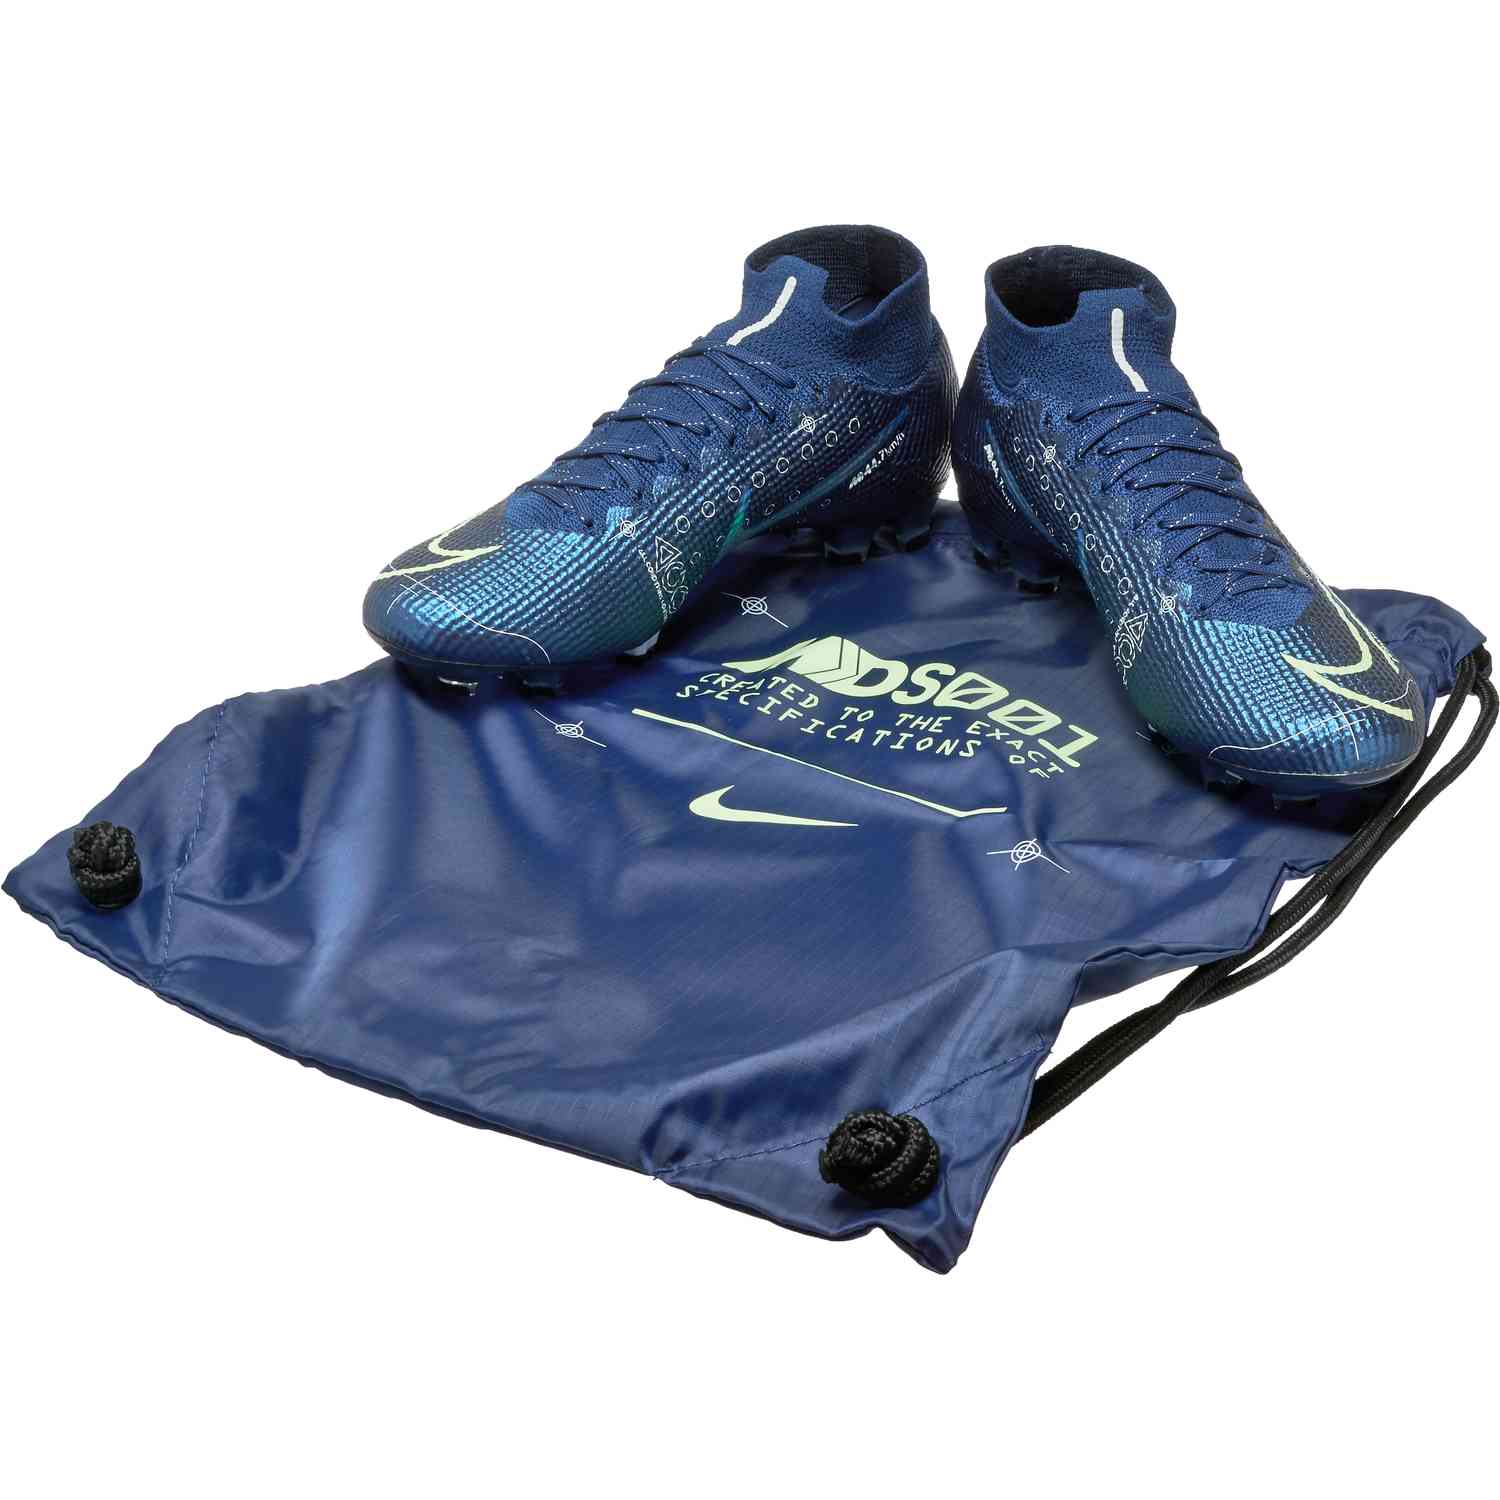 Nike Dream Speed Soccer Pack Best Price Guarantee at DICK 'S